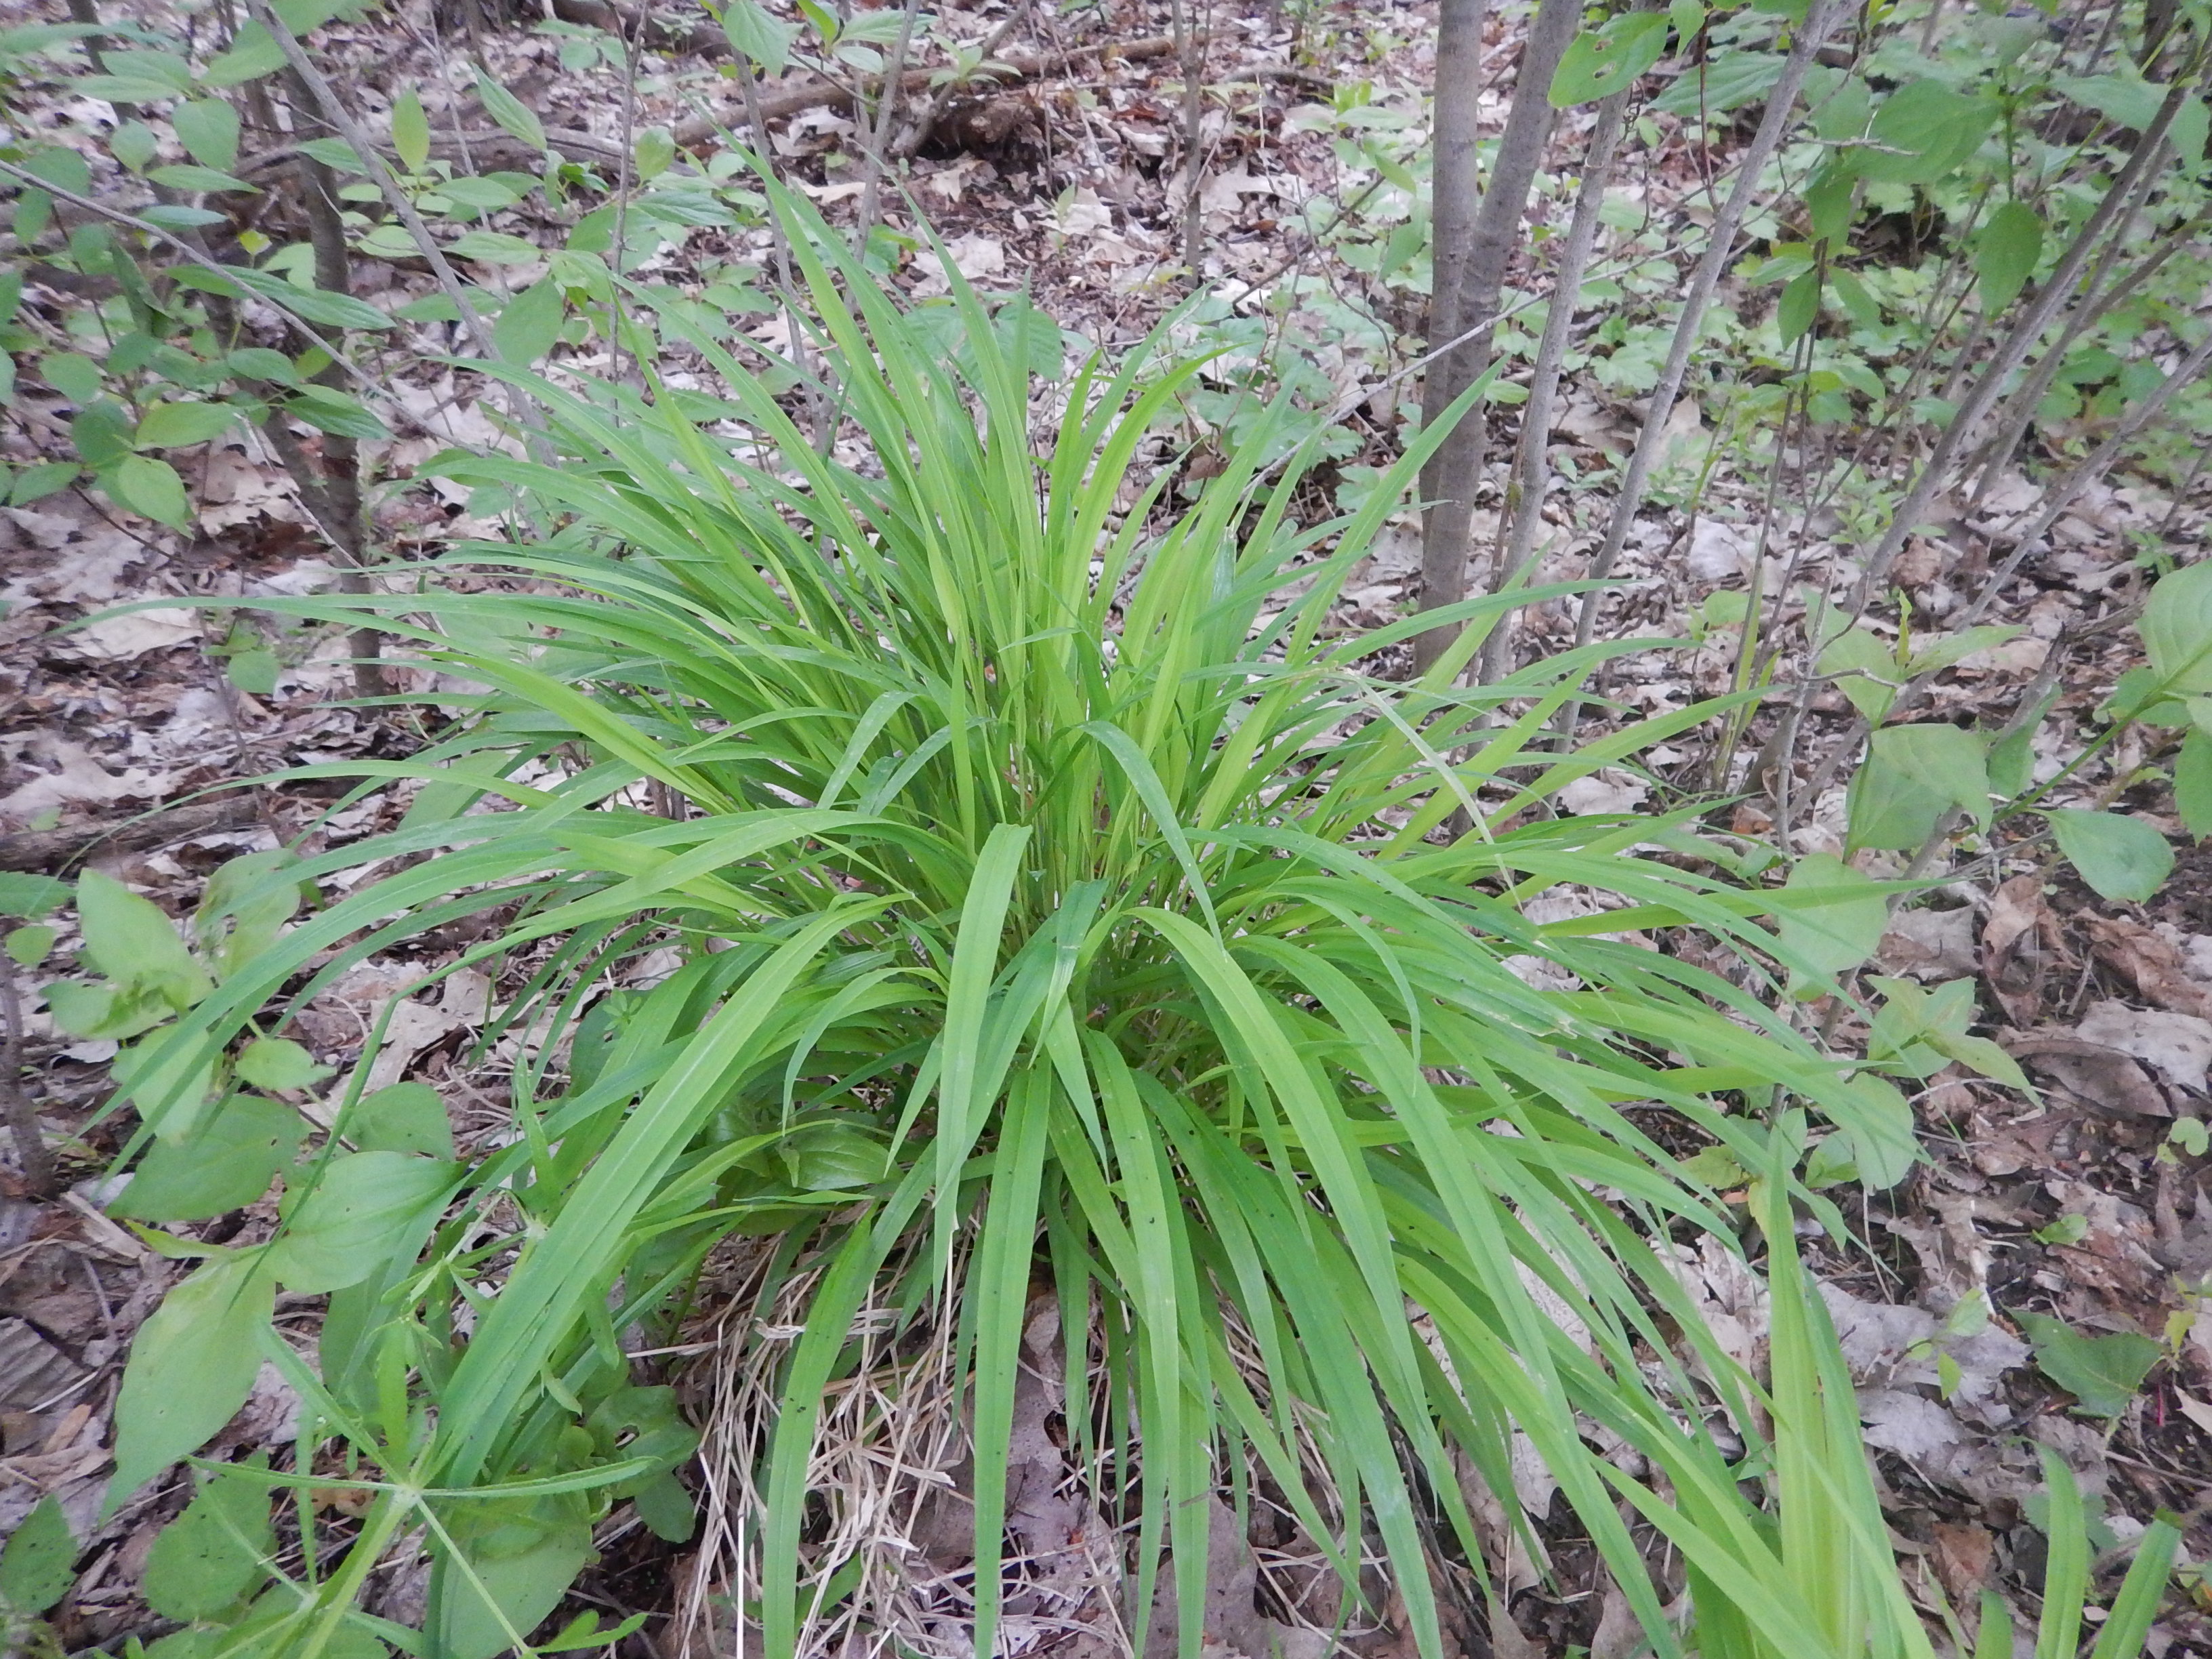 A clump of grass with long blades growing in the underbrush of the woods.